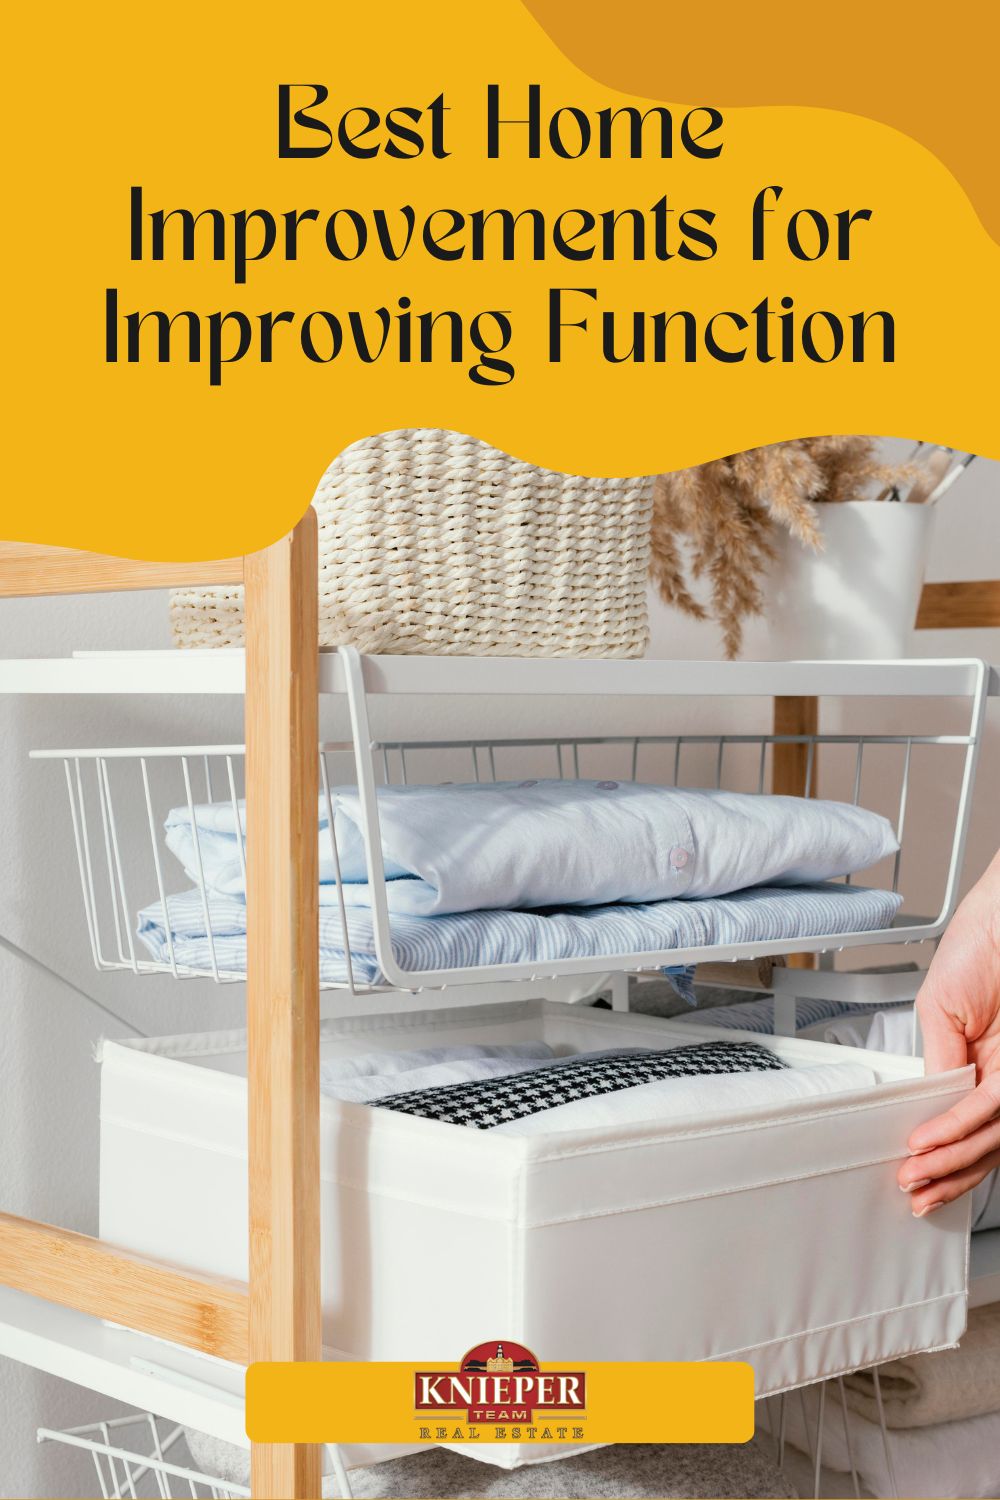 Best Home Improvements for Improving Function